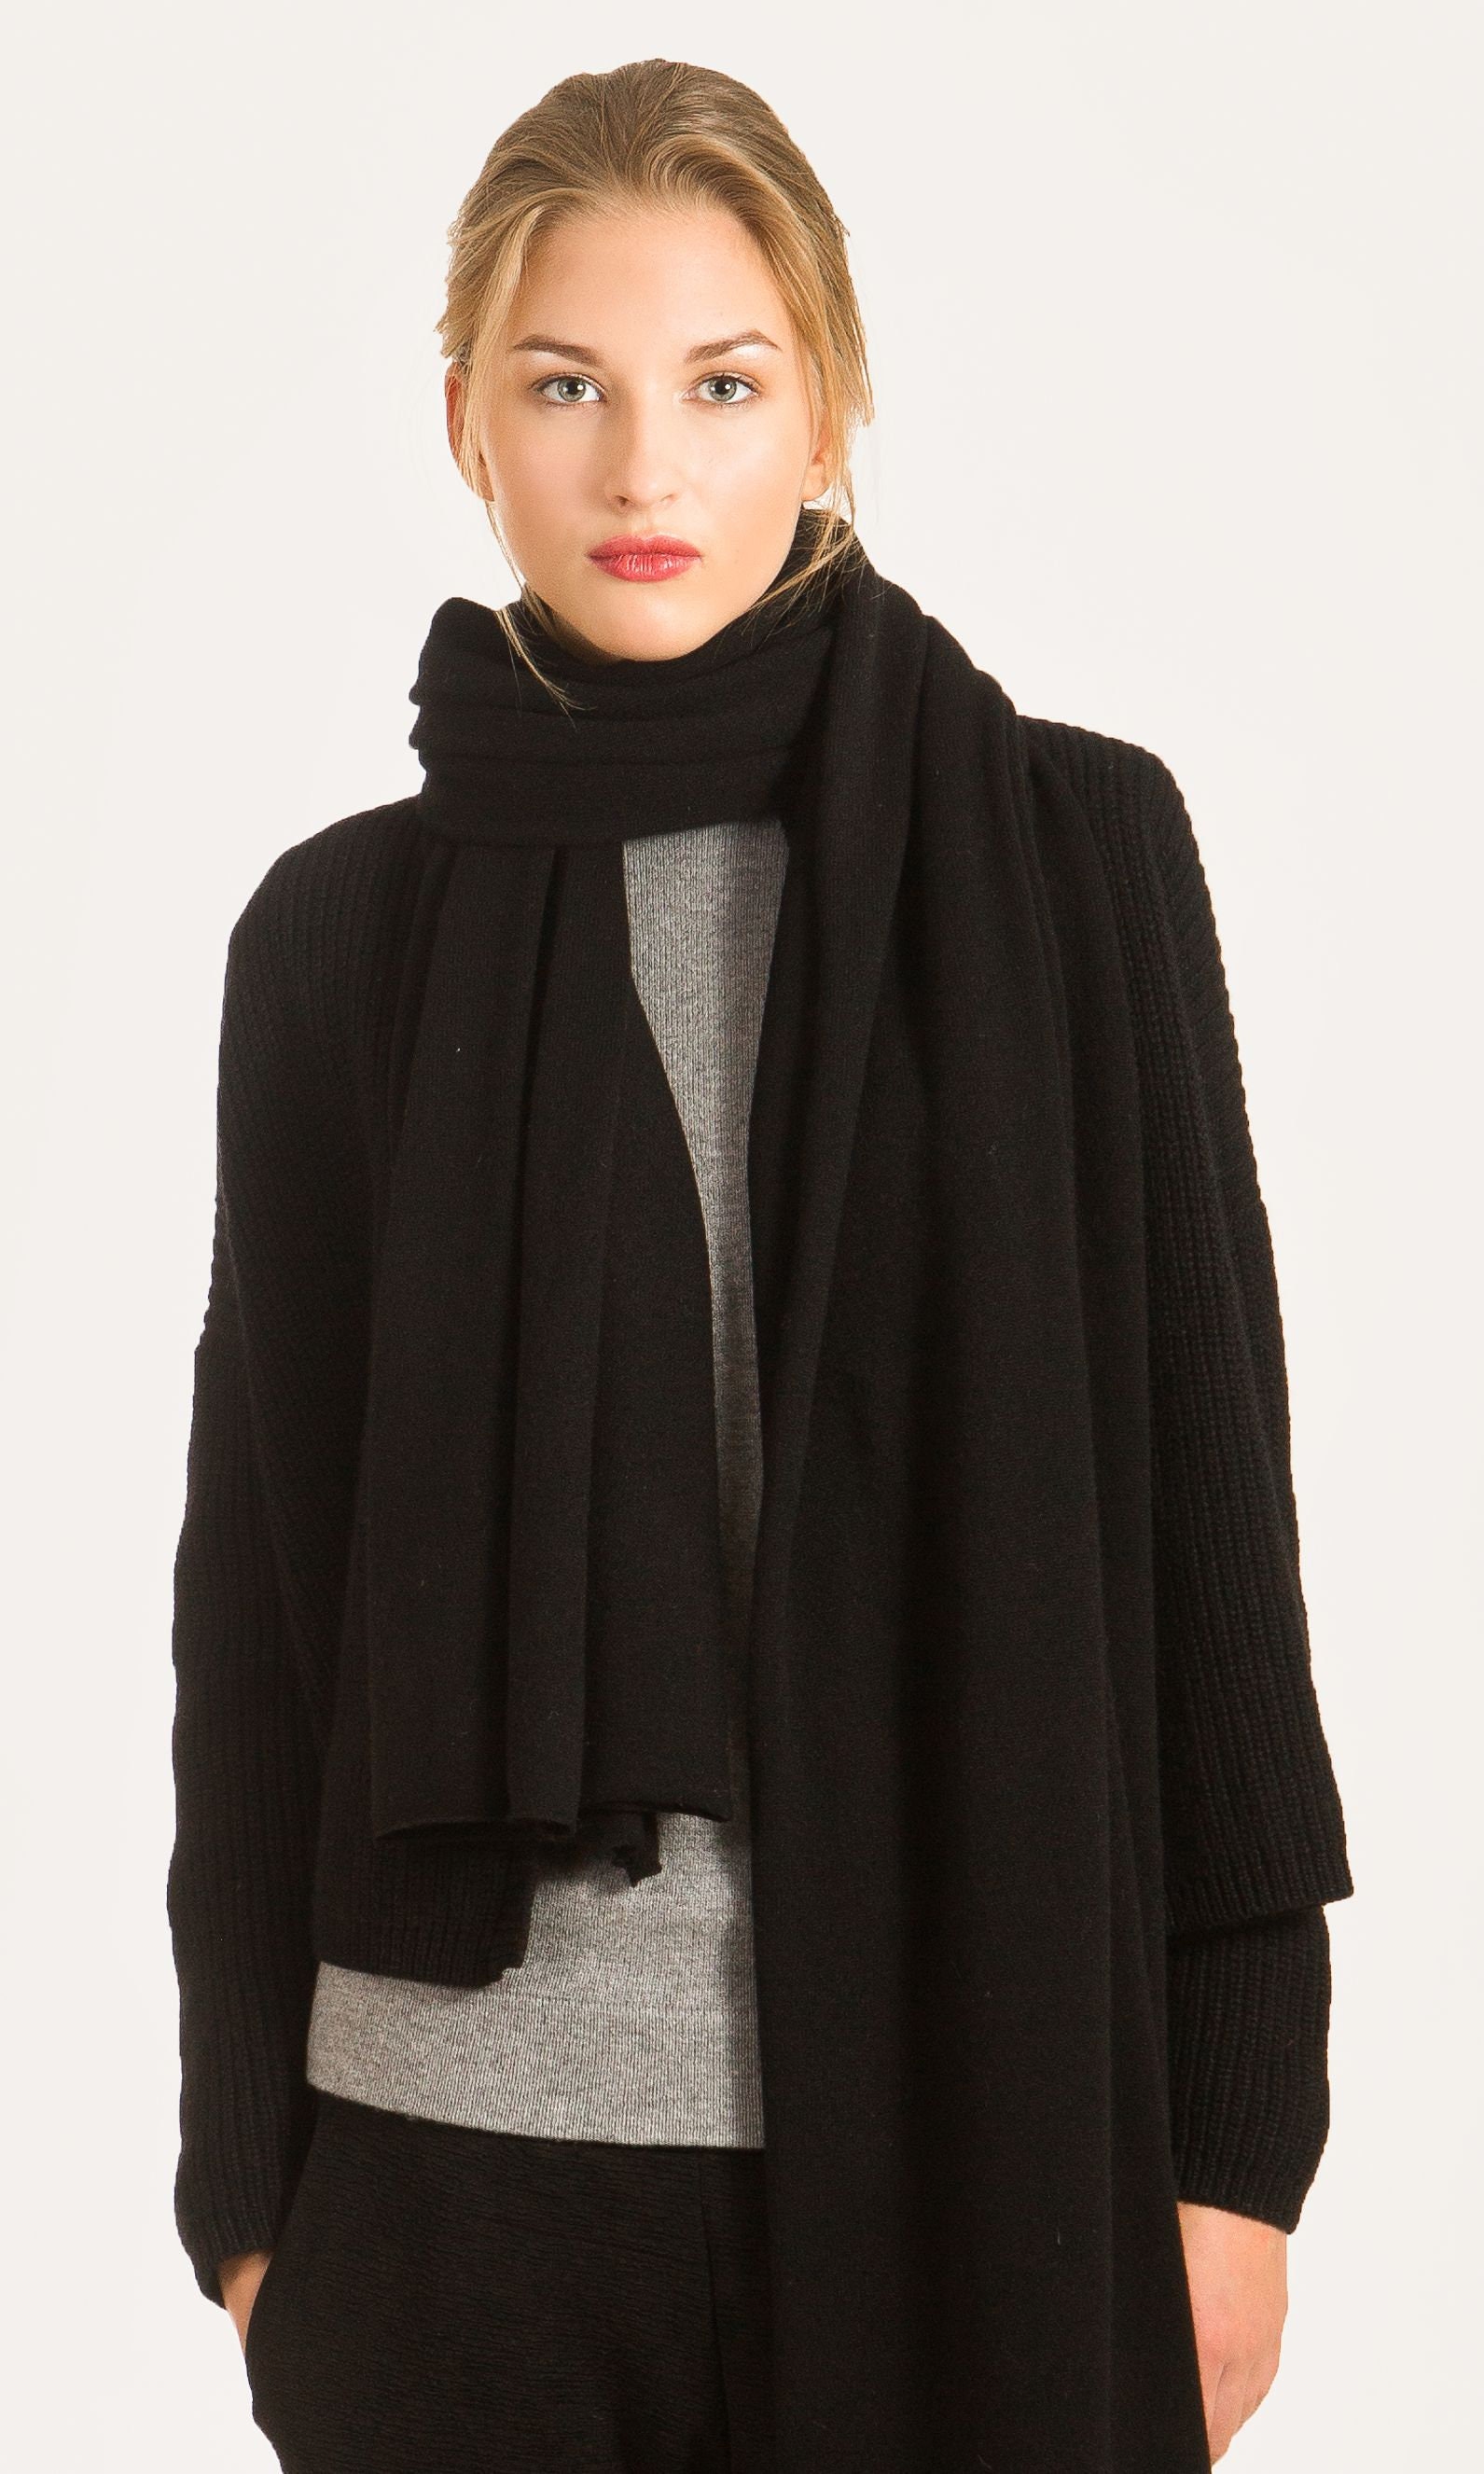 Wool and cashmere cape, black, Shawls & Stoles Women's